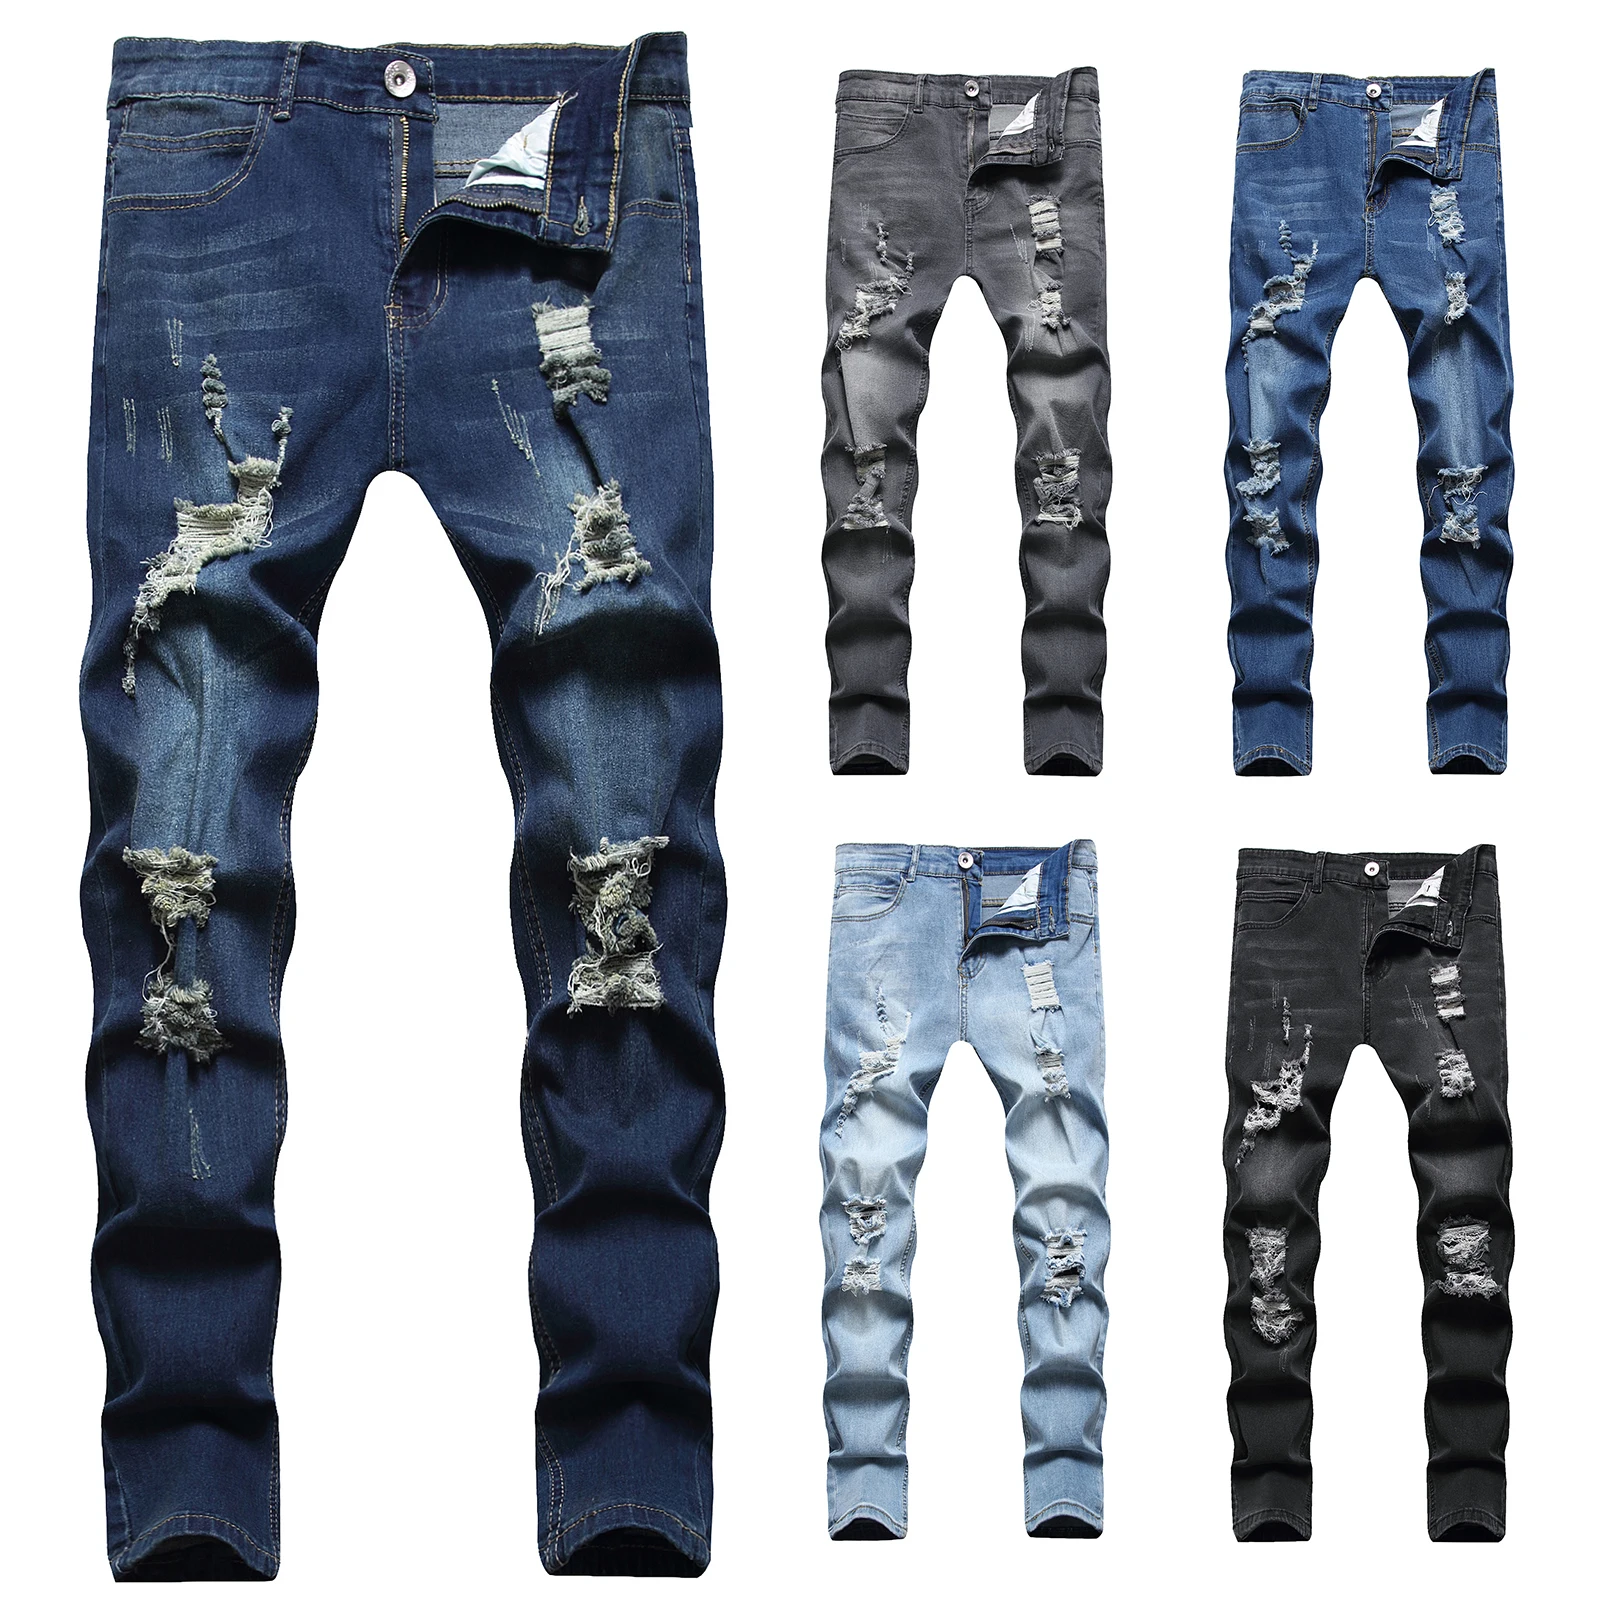 loose jeans Men's Sweatpants Sexy Hole Jeans Pants Casual Summer Autumn Male Ripped Skinny Trousers Slim Biker Outwears Pants cargo jeans